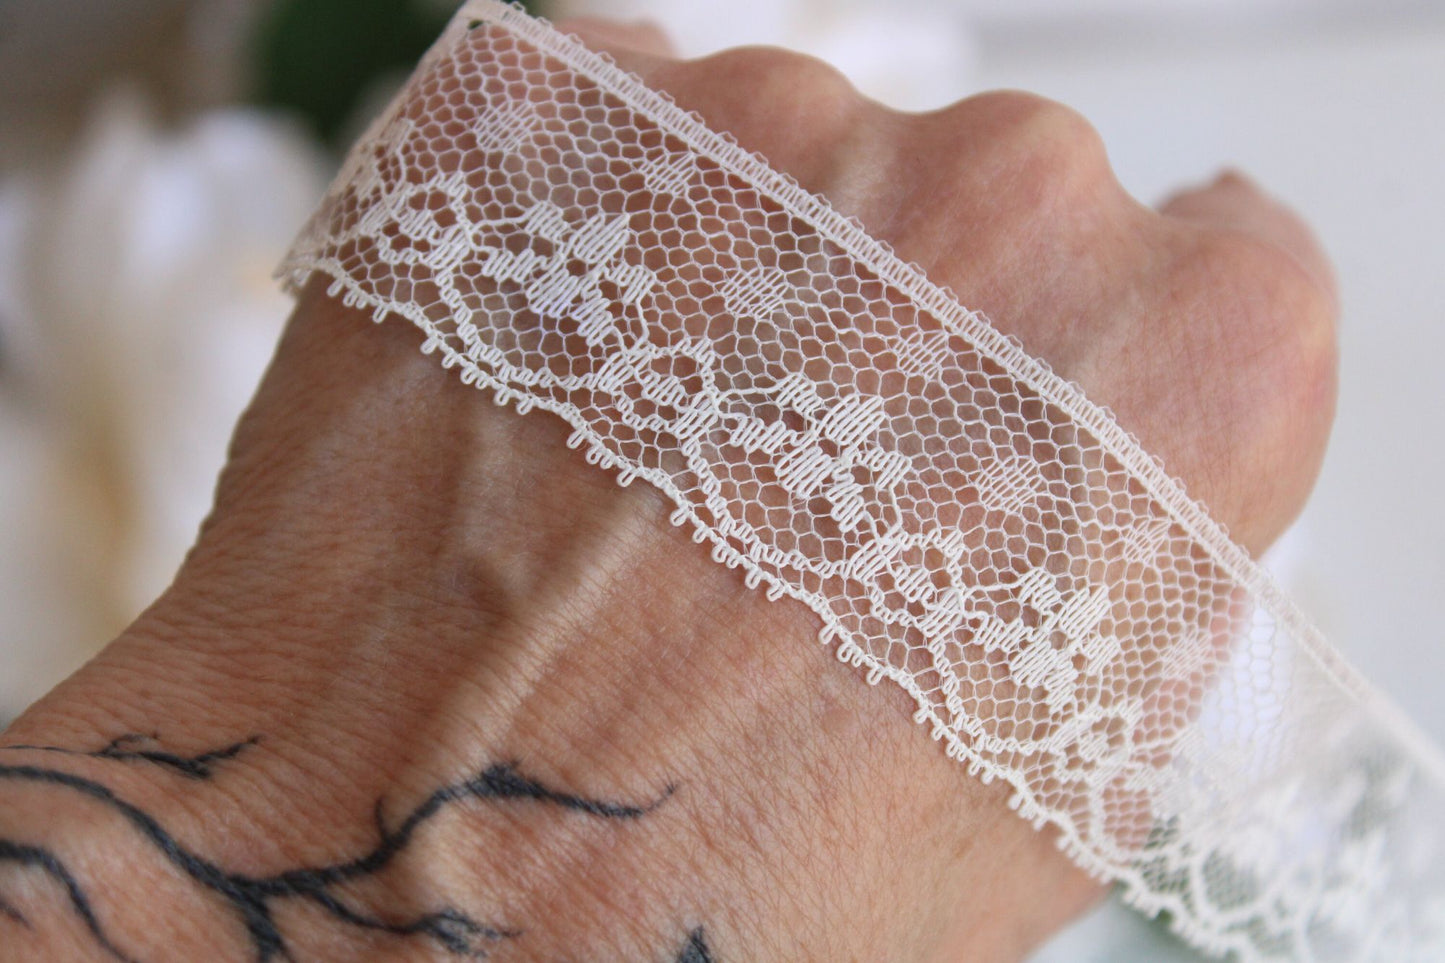 Vintage Ivory Lace Trim, 2 Yards, 1" wide,  Nylon, Sewing Supply